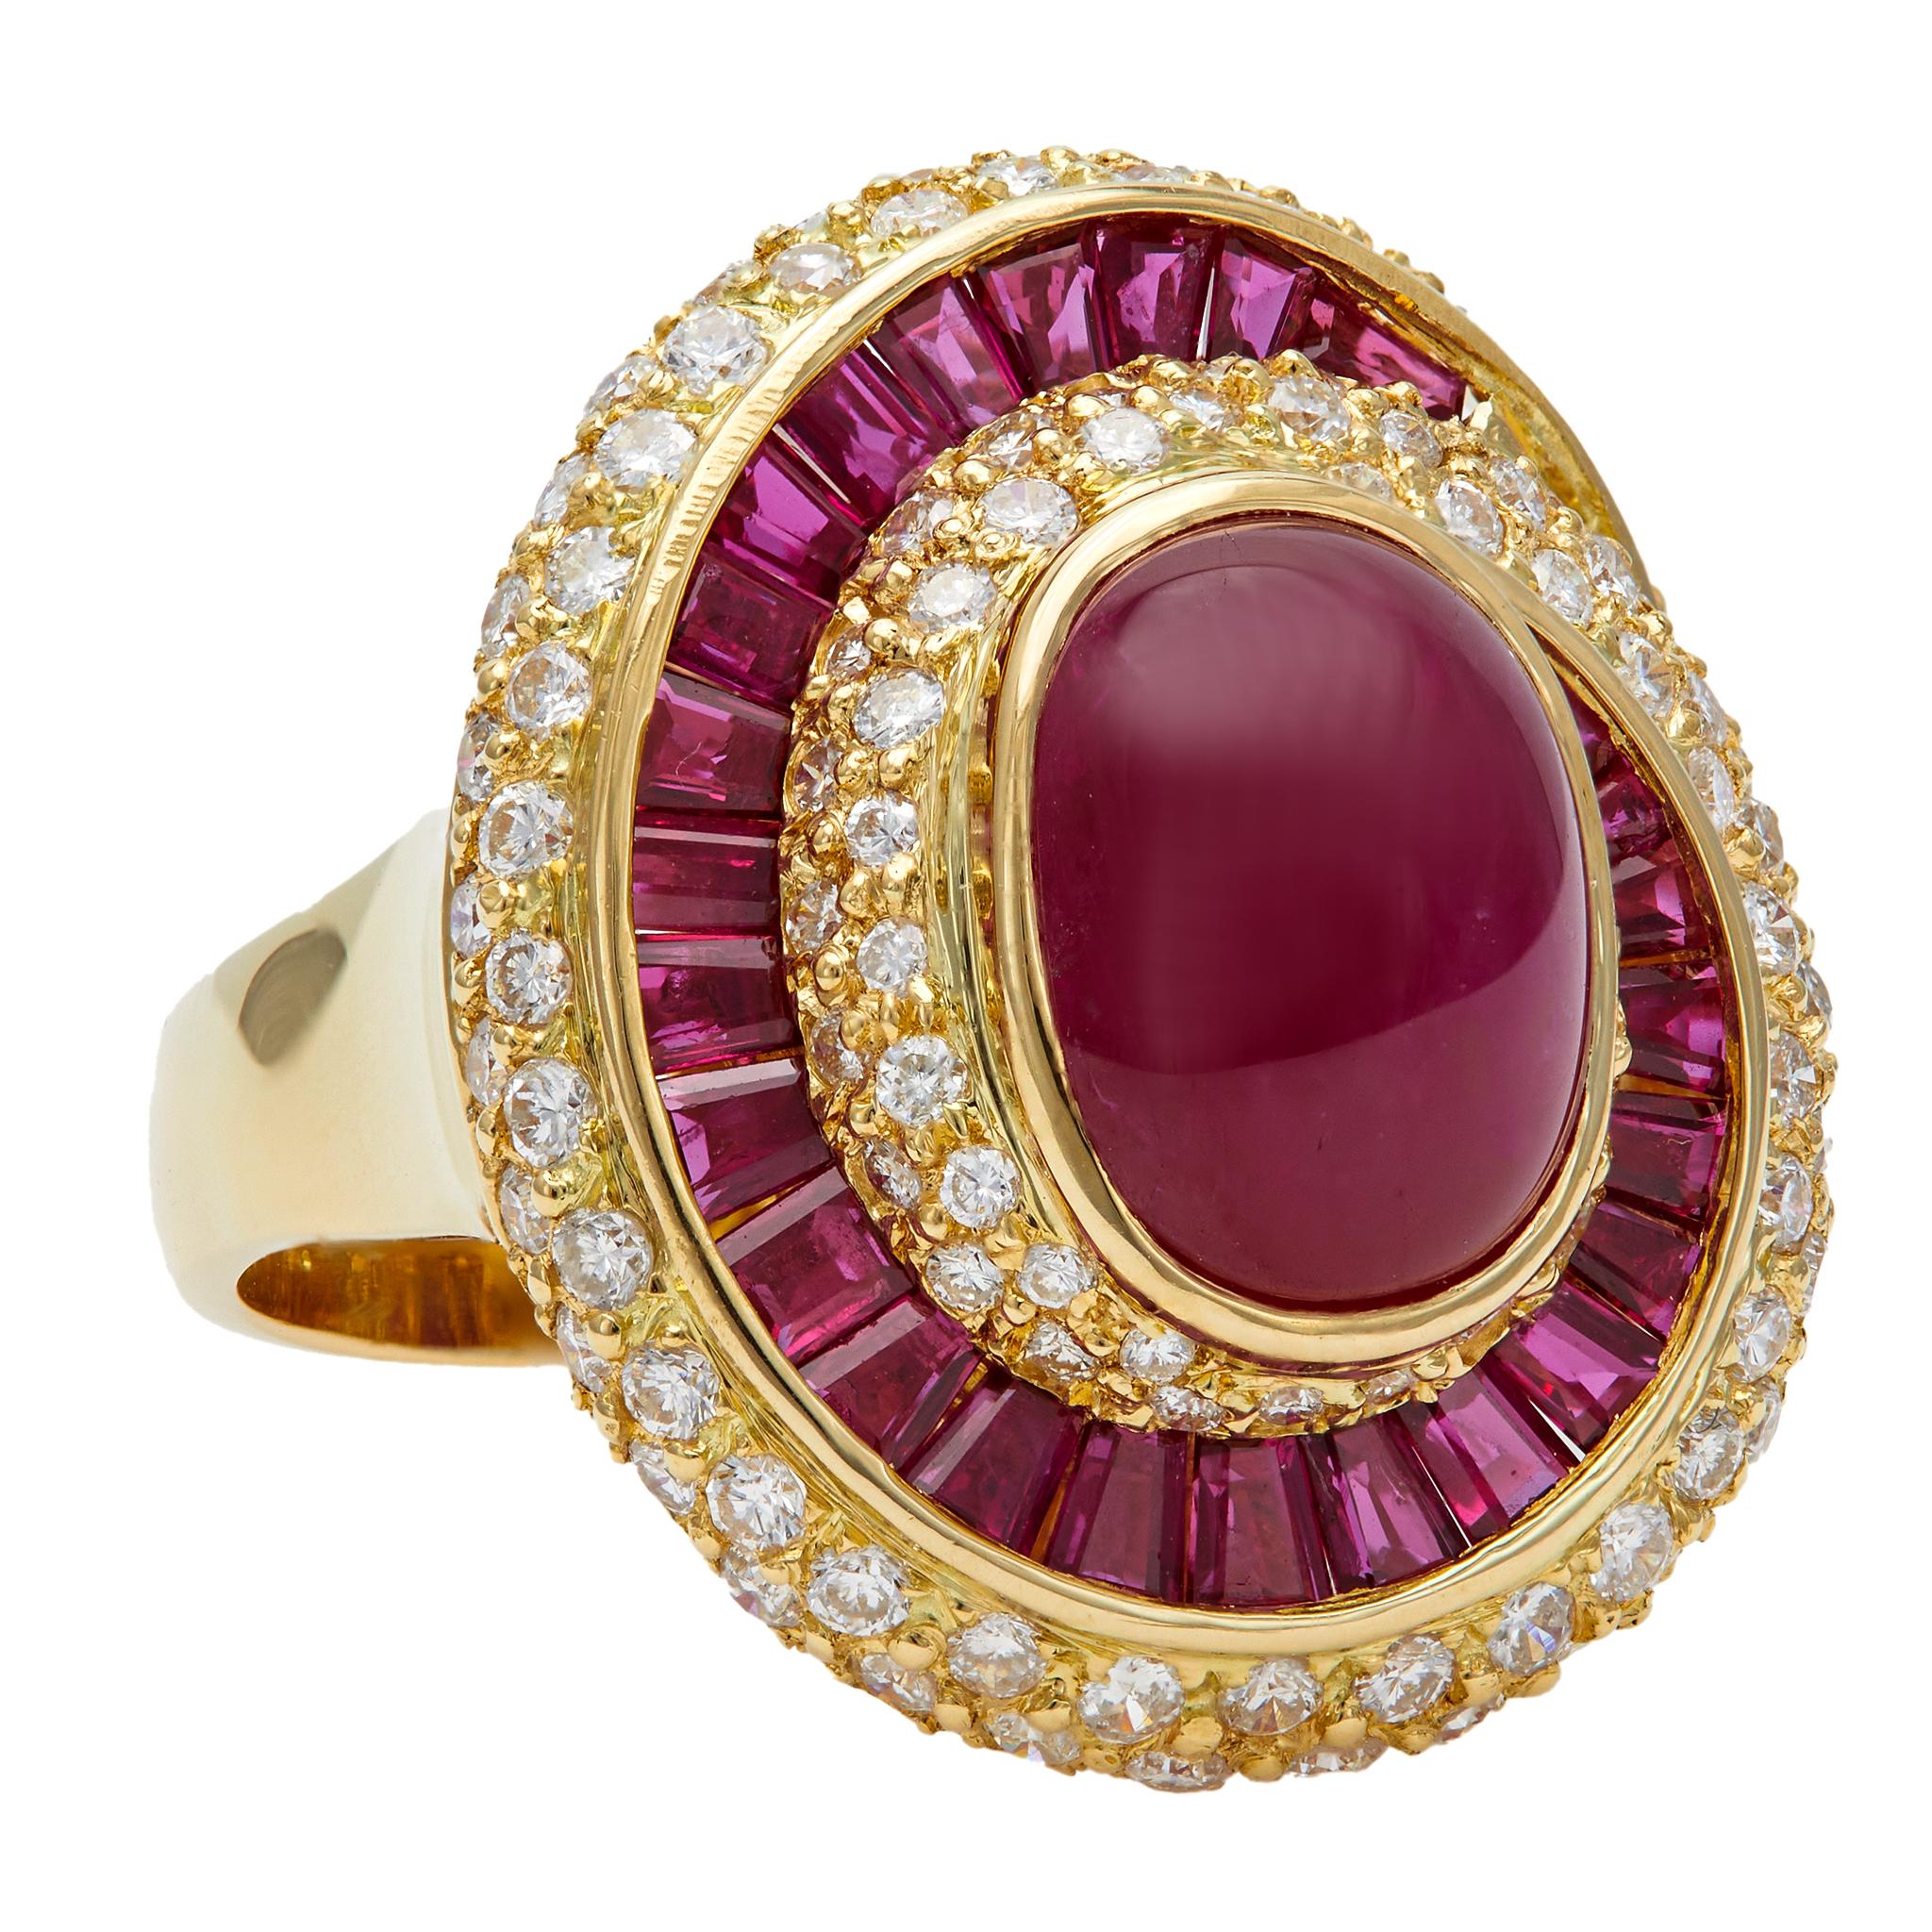 Women's or Men's Vintage 7.06 Carat Ruby and Diamond 18k Yellow Gold Swirl Cocktail Ring